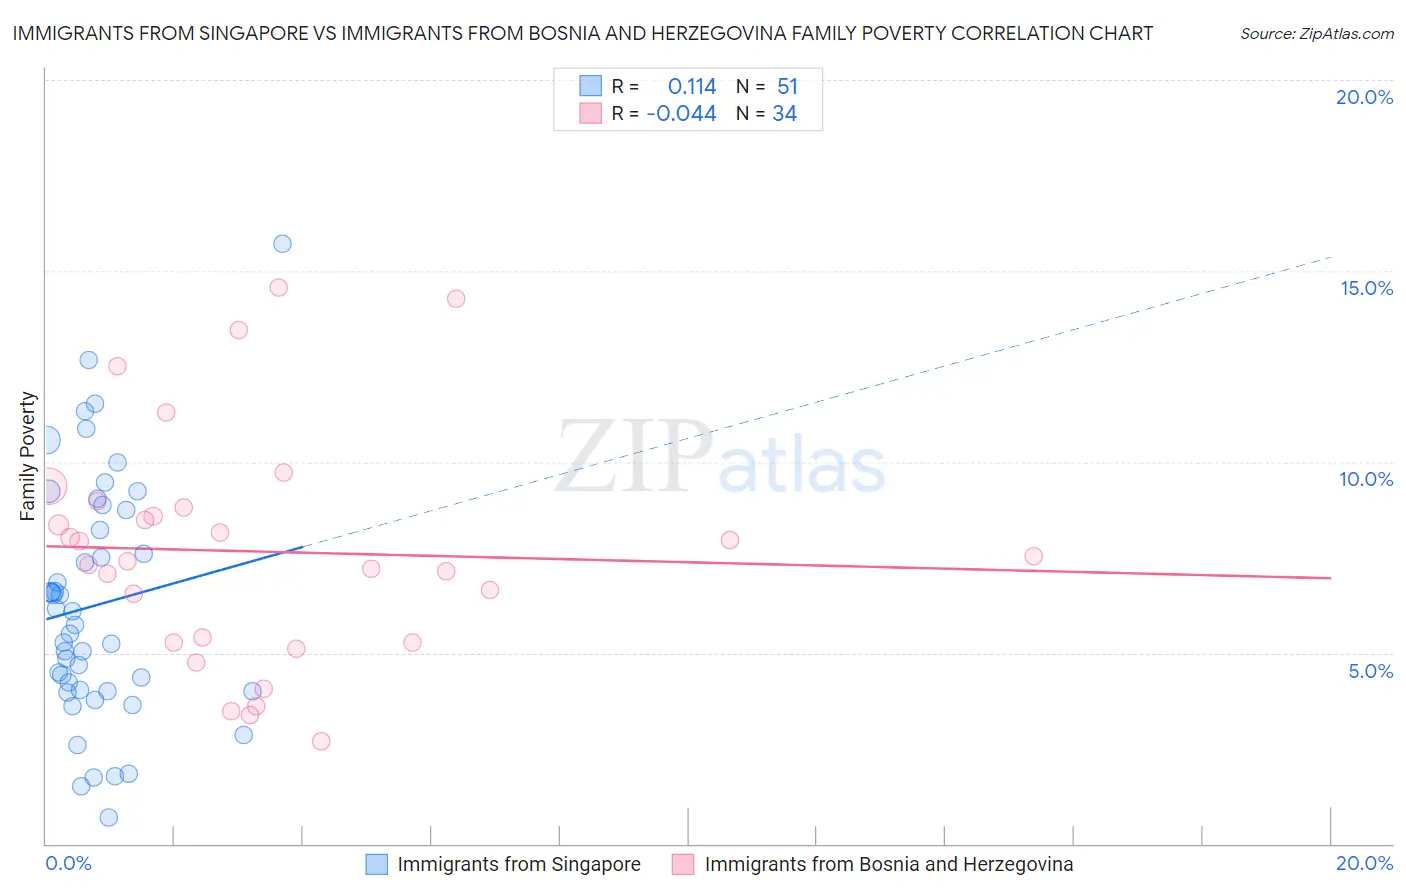 Immigrants from Singapore vs Immigrants from Bosnia and Herzegovina Family Poverty